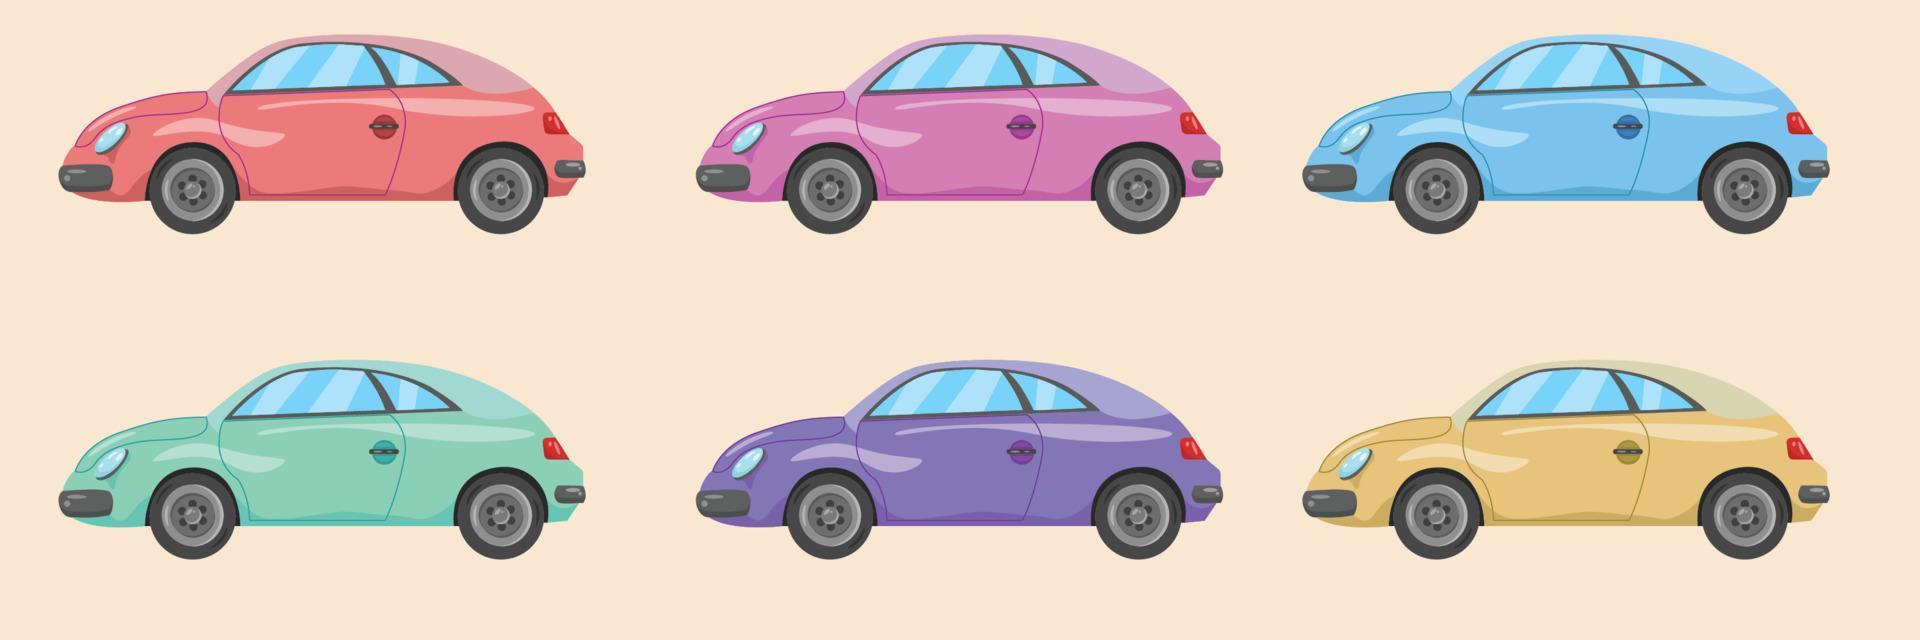 Set of Colorful Cars Vector Collection in Flat Design Style